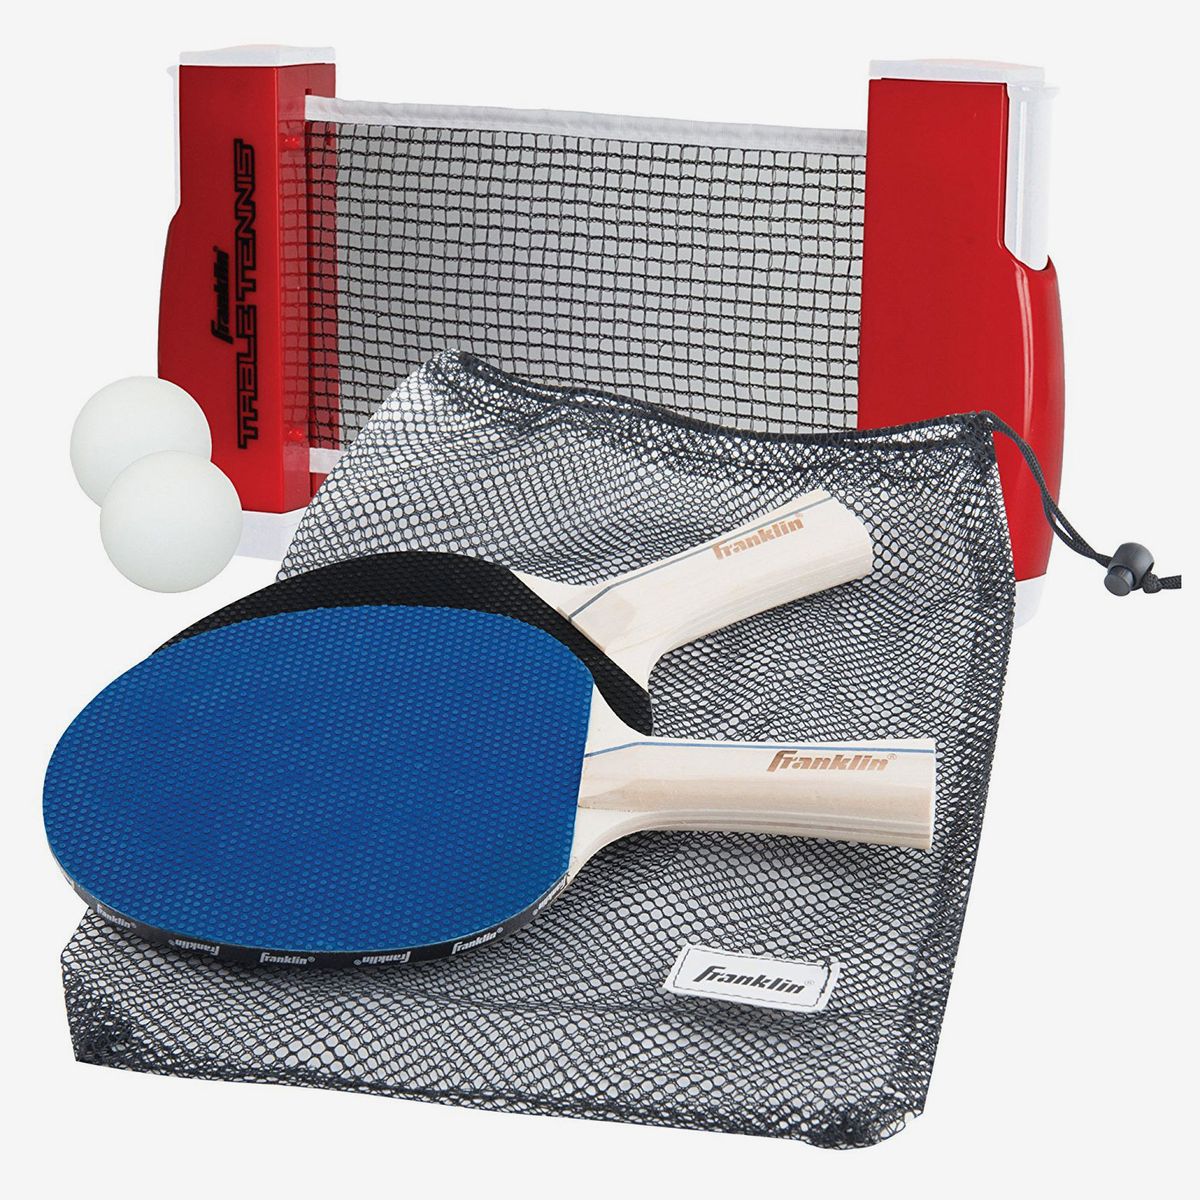 SALE Free shipping Donic Cayman Table Tennis Ping Pong Straight Handle 